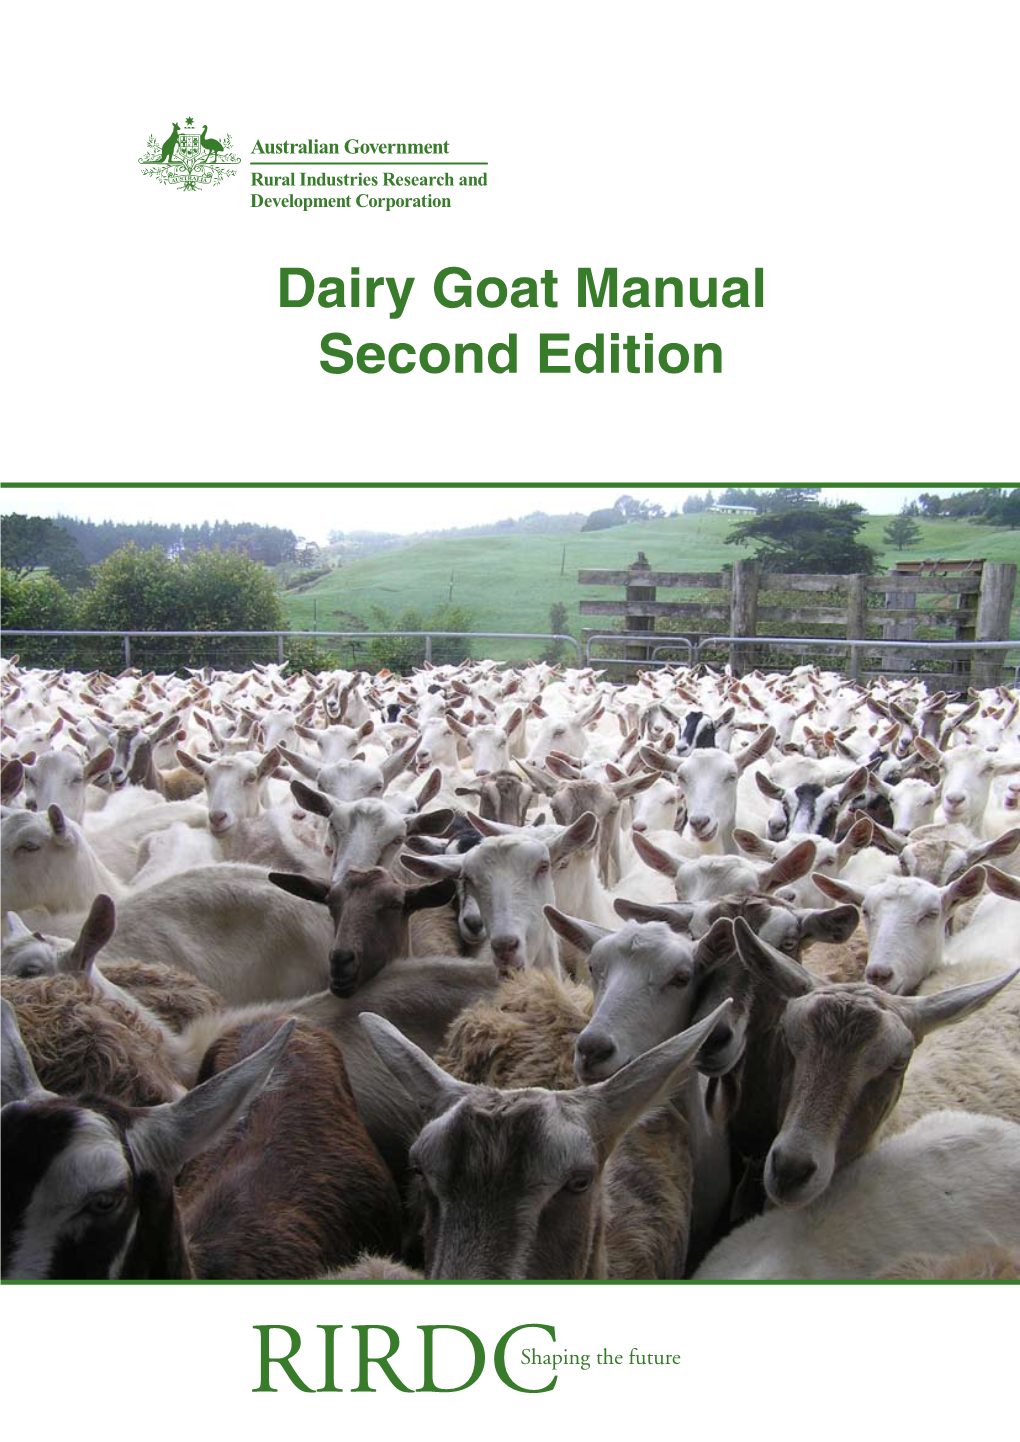 Dairy Goat Manual Second Edition